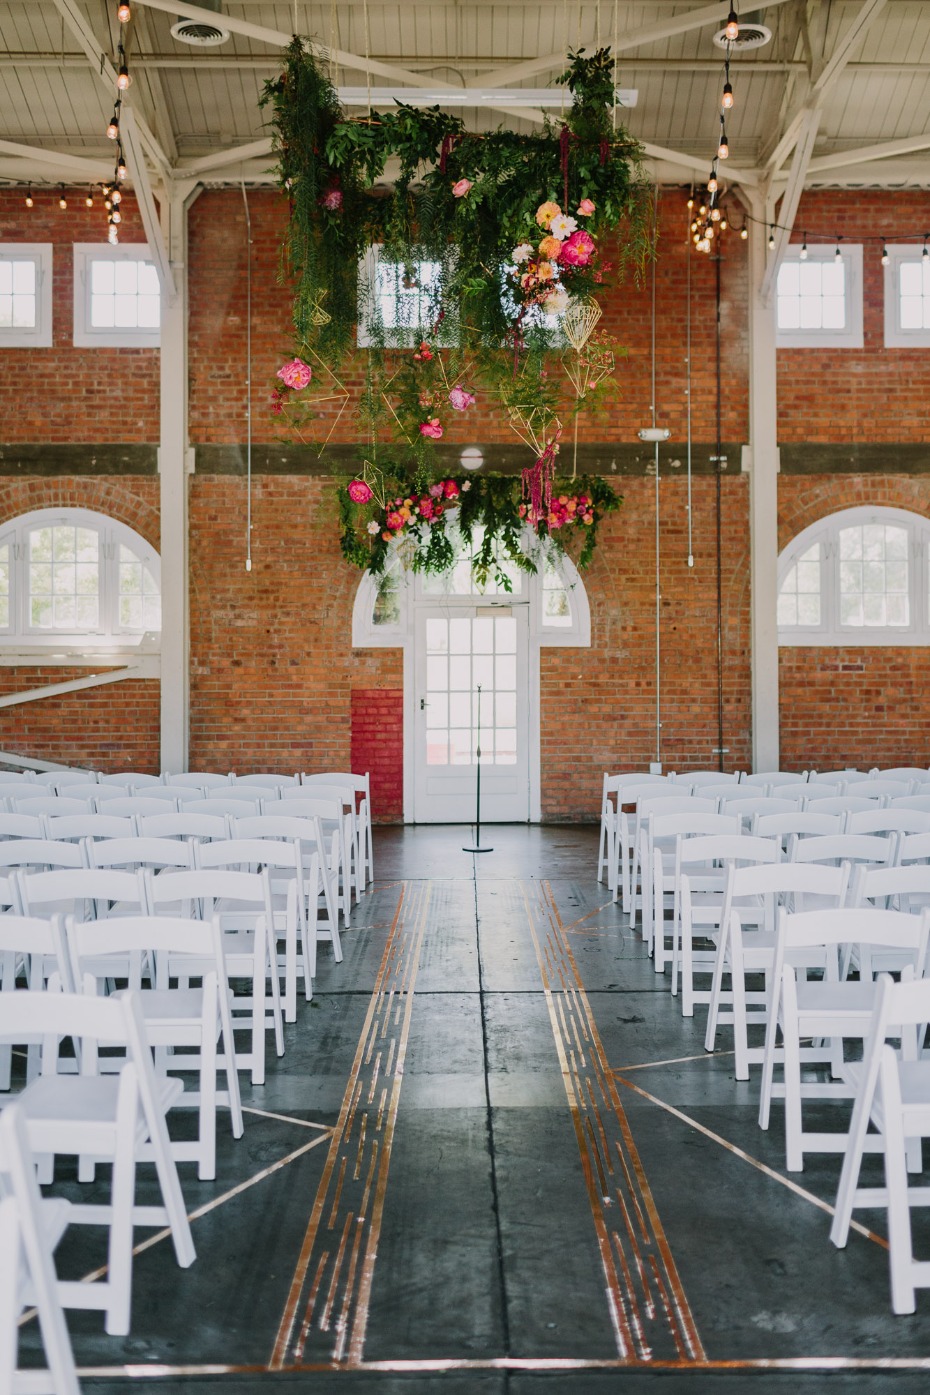 Open and airy ceremony space with greenery